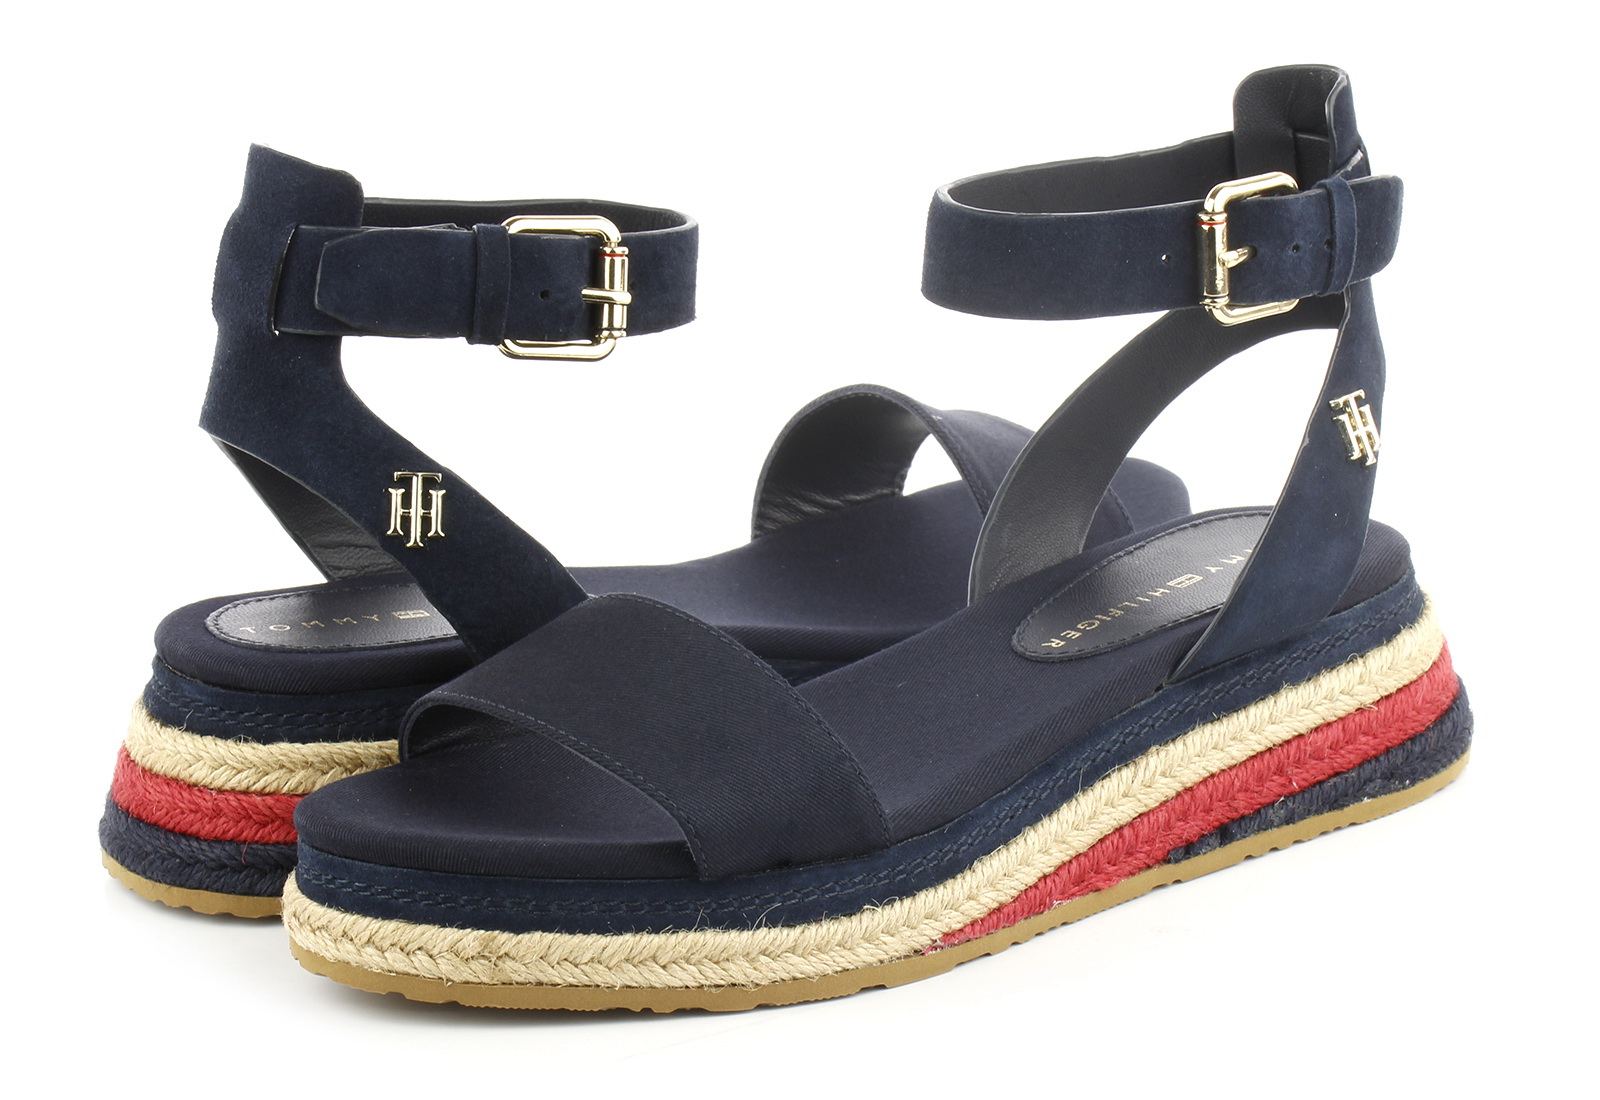 Tommy Hilfiger Sandals Heidi - FW0-6233-DW5 - Online shop for sneakers, shoes and boots